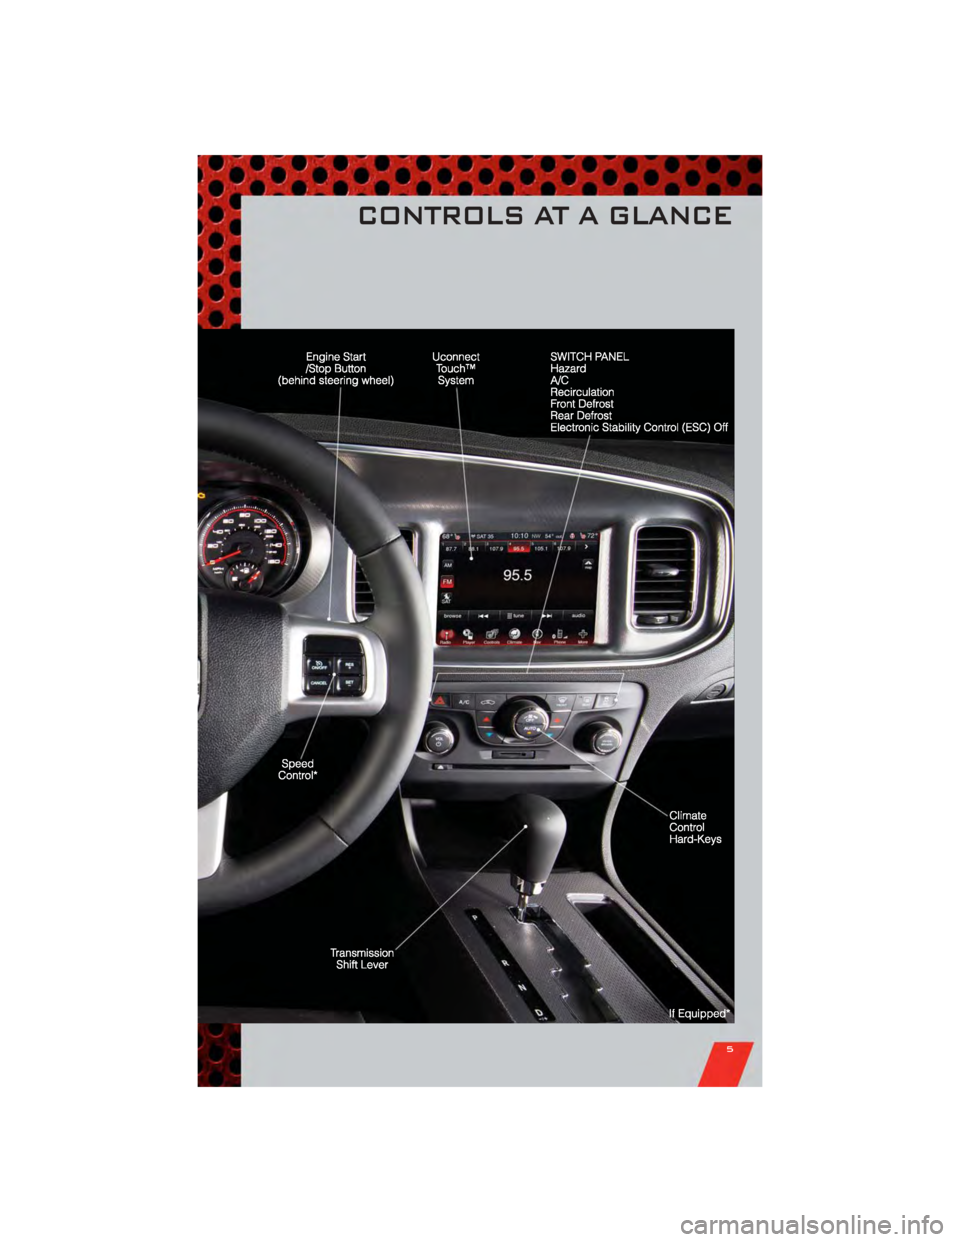 DODGE CHARGER 2011 7.G Owners Manual CONTROLS AT A GLANCE
5 